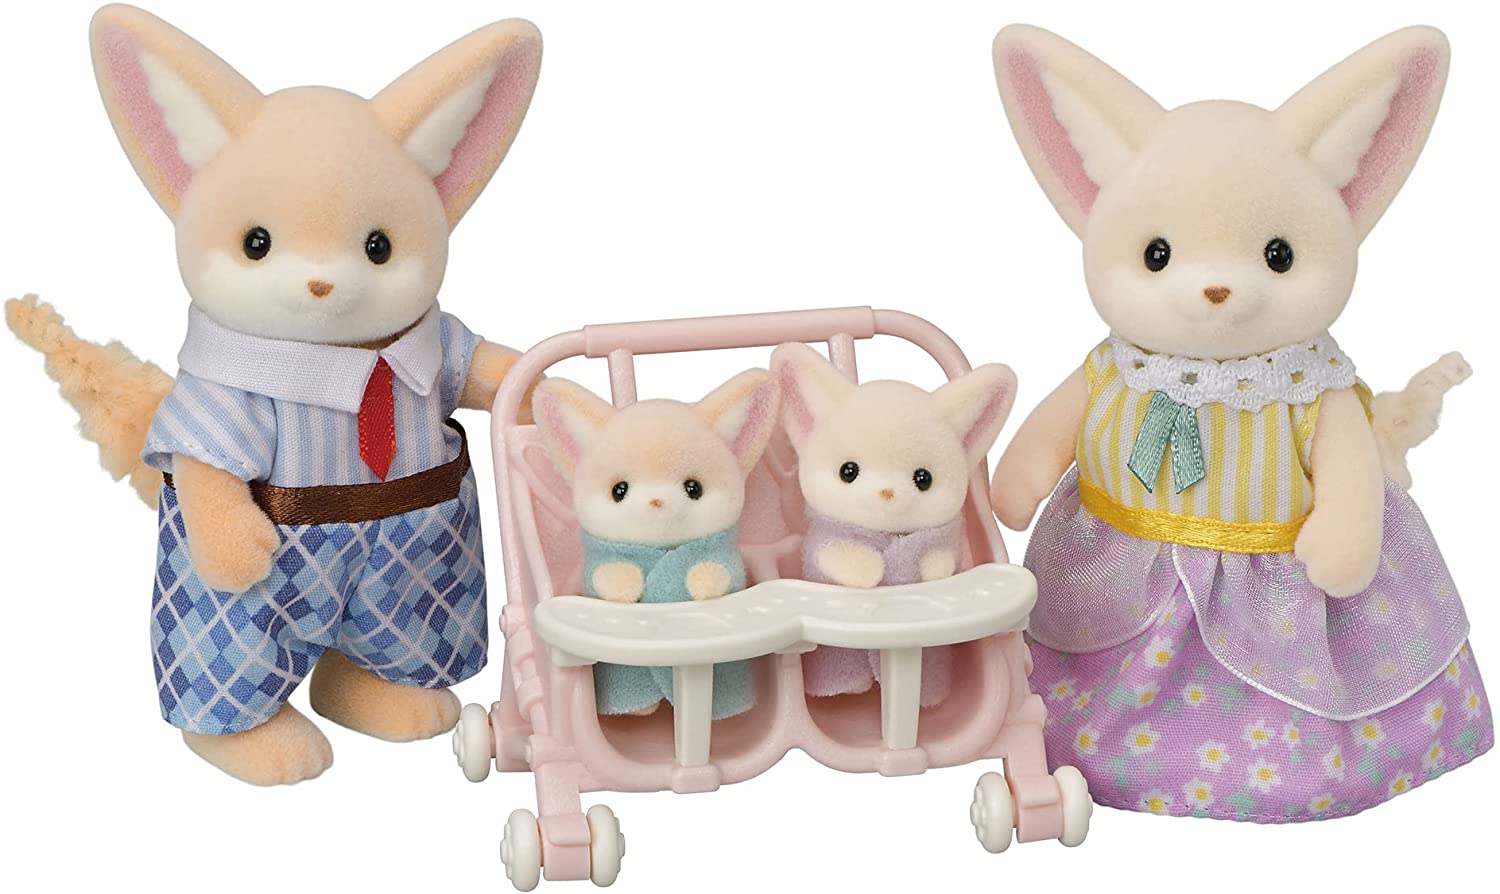 Sylvanian Families doll Fennec family FS-48 - Discovery Japan Mall